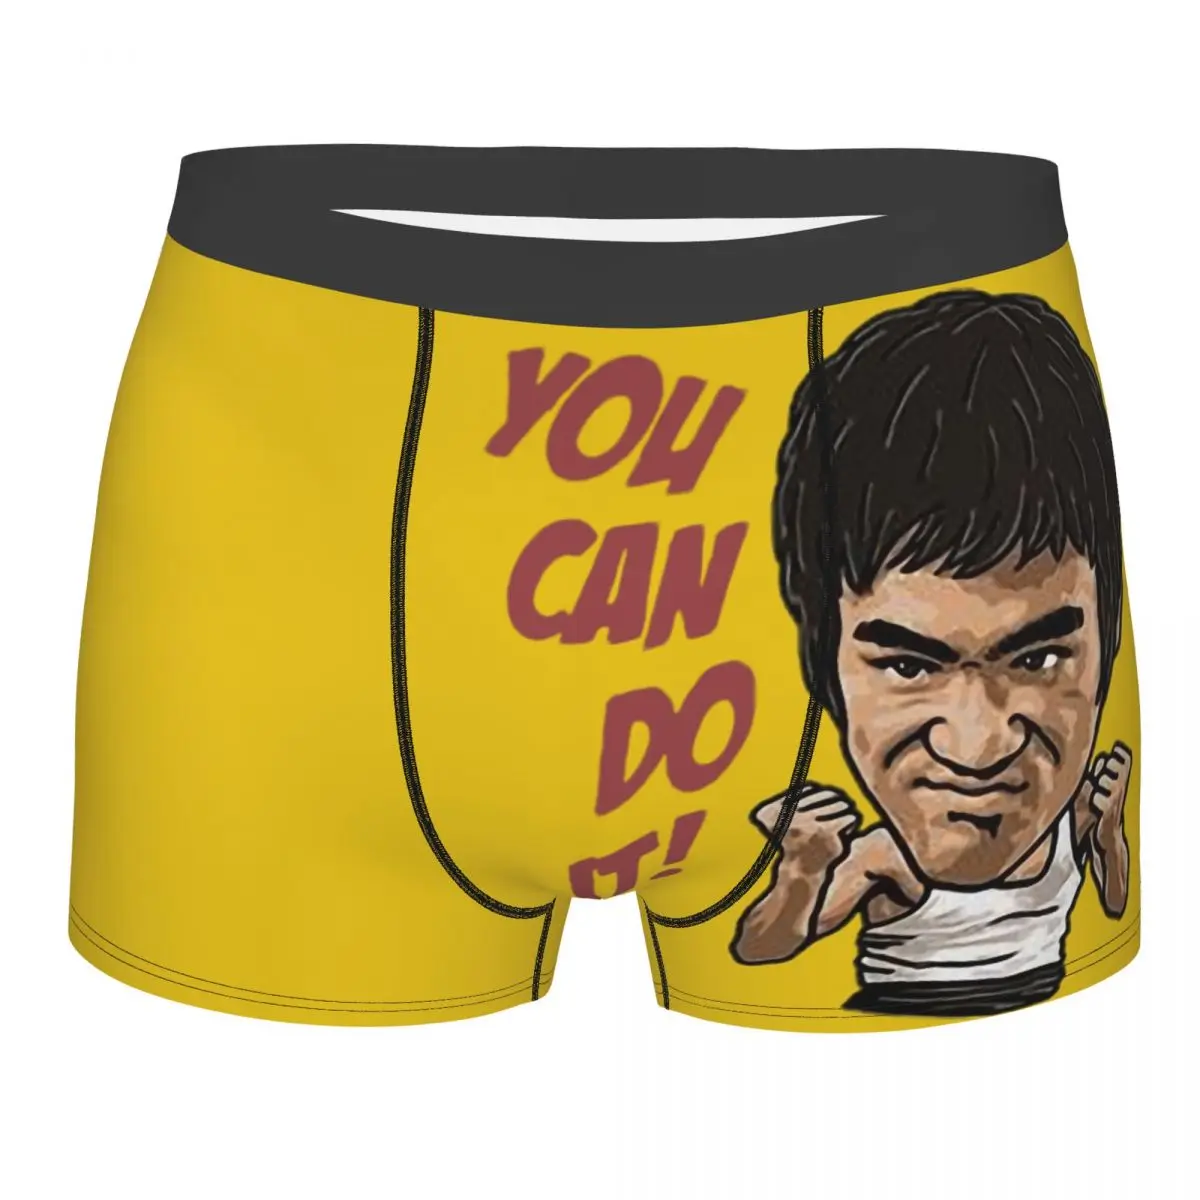 The Dragon Master Bruce Lee Kung Fu You Can DO It Man'scosy Boxer Briefs Underwear Highly Breathable Top Quality Birthday Gifts